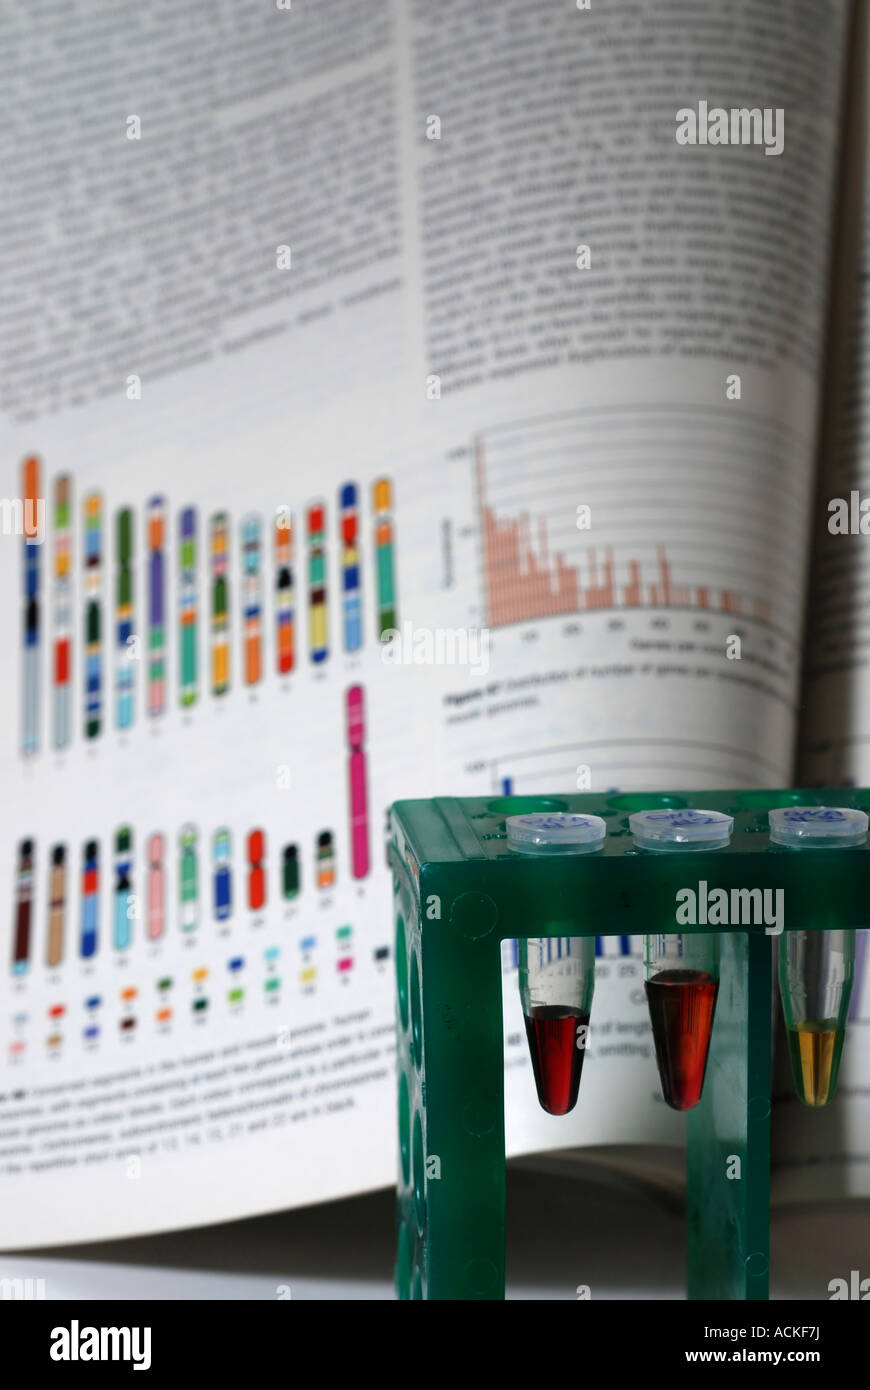 DNA samples in a test tube rack with graphics charts reference in the background Stock Photo